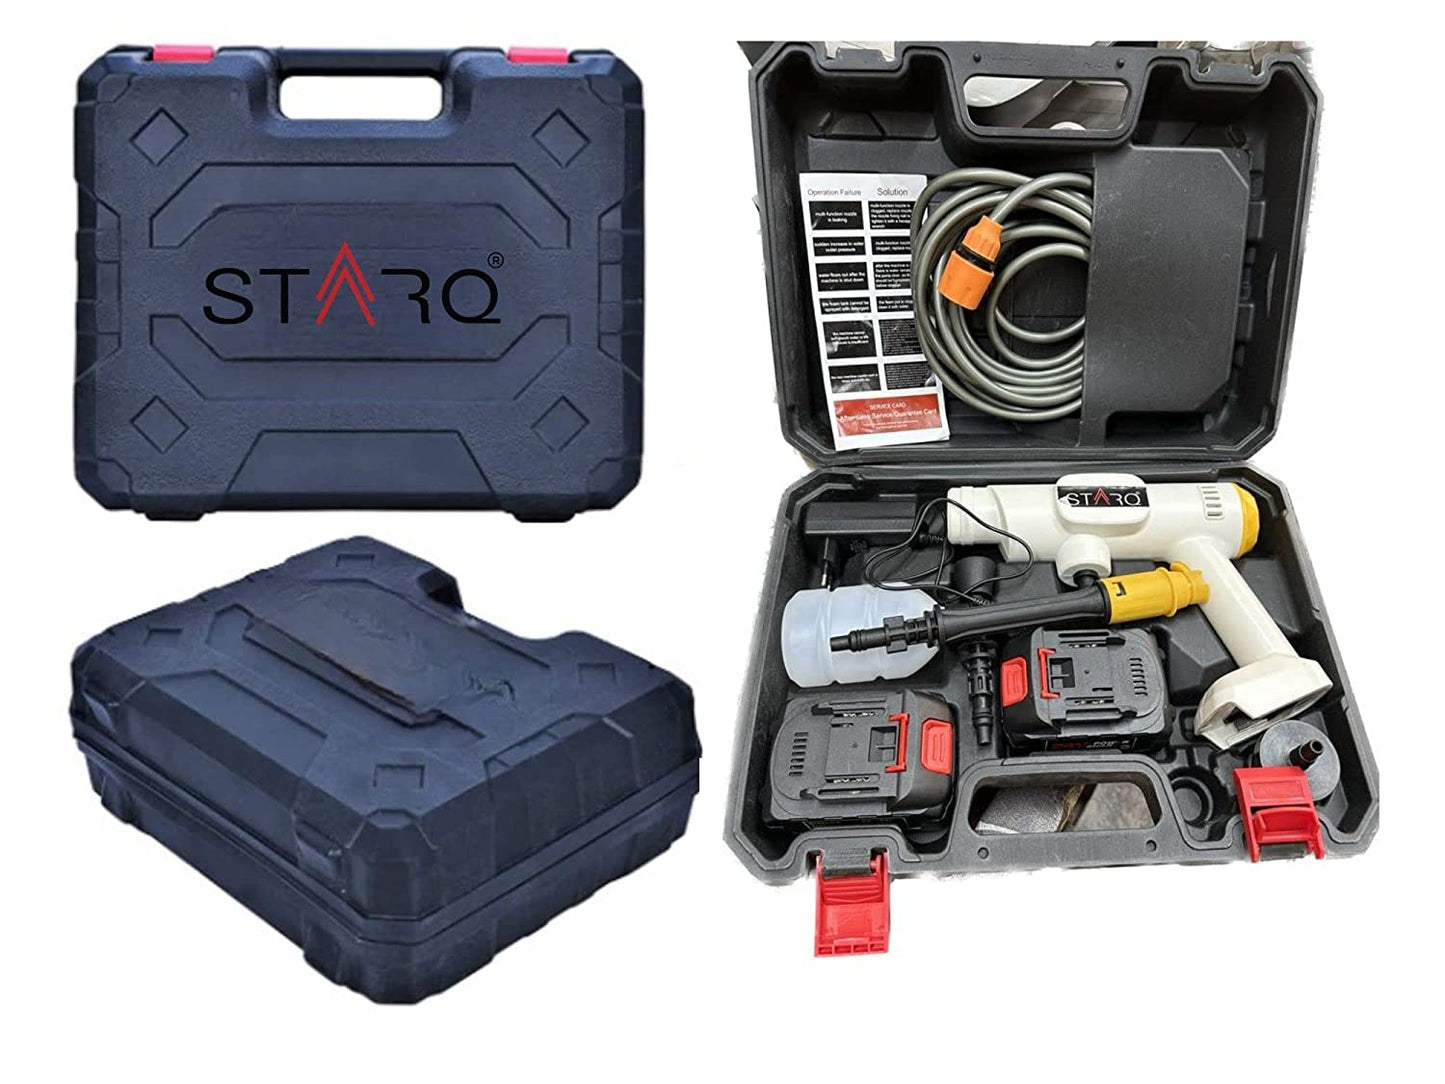 STARQ Cordless 24V Car Pressure Washer Power Washer with Accessories Portable Power Cleaner